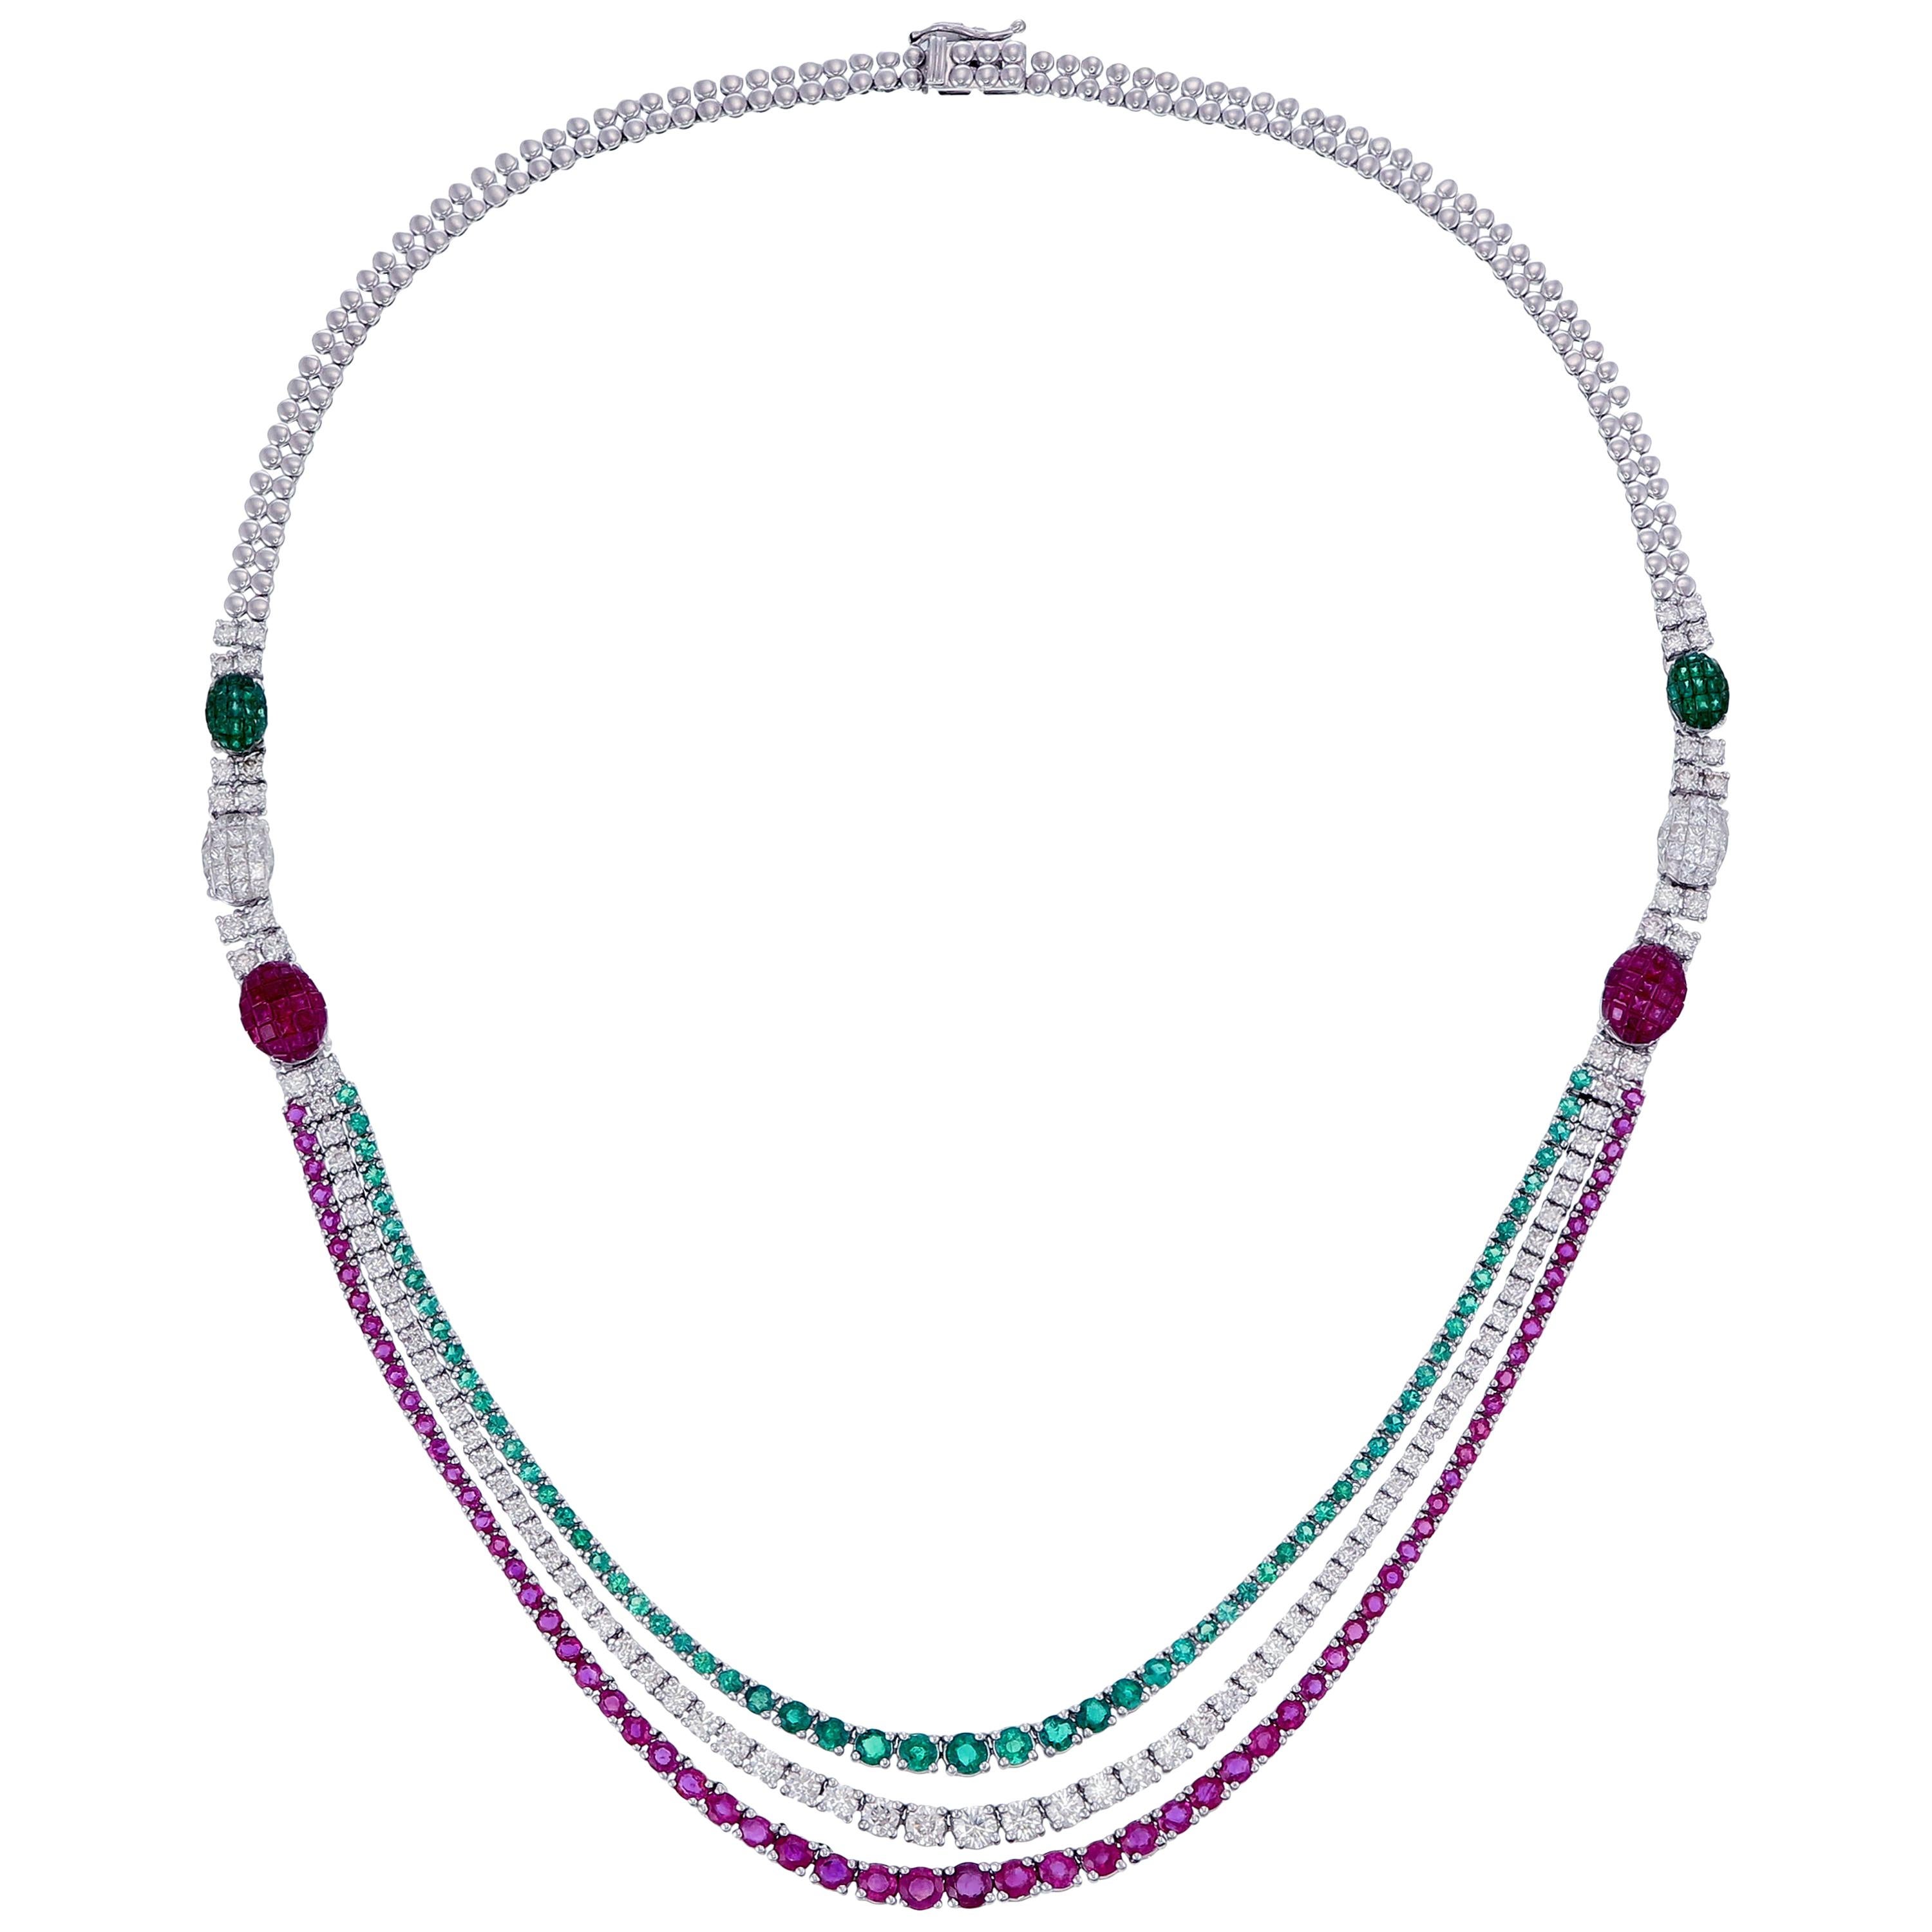 Emerald, Ruby, and Diamond Necklace Mounted in 18 Karat Gold